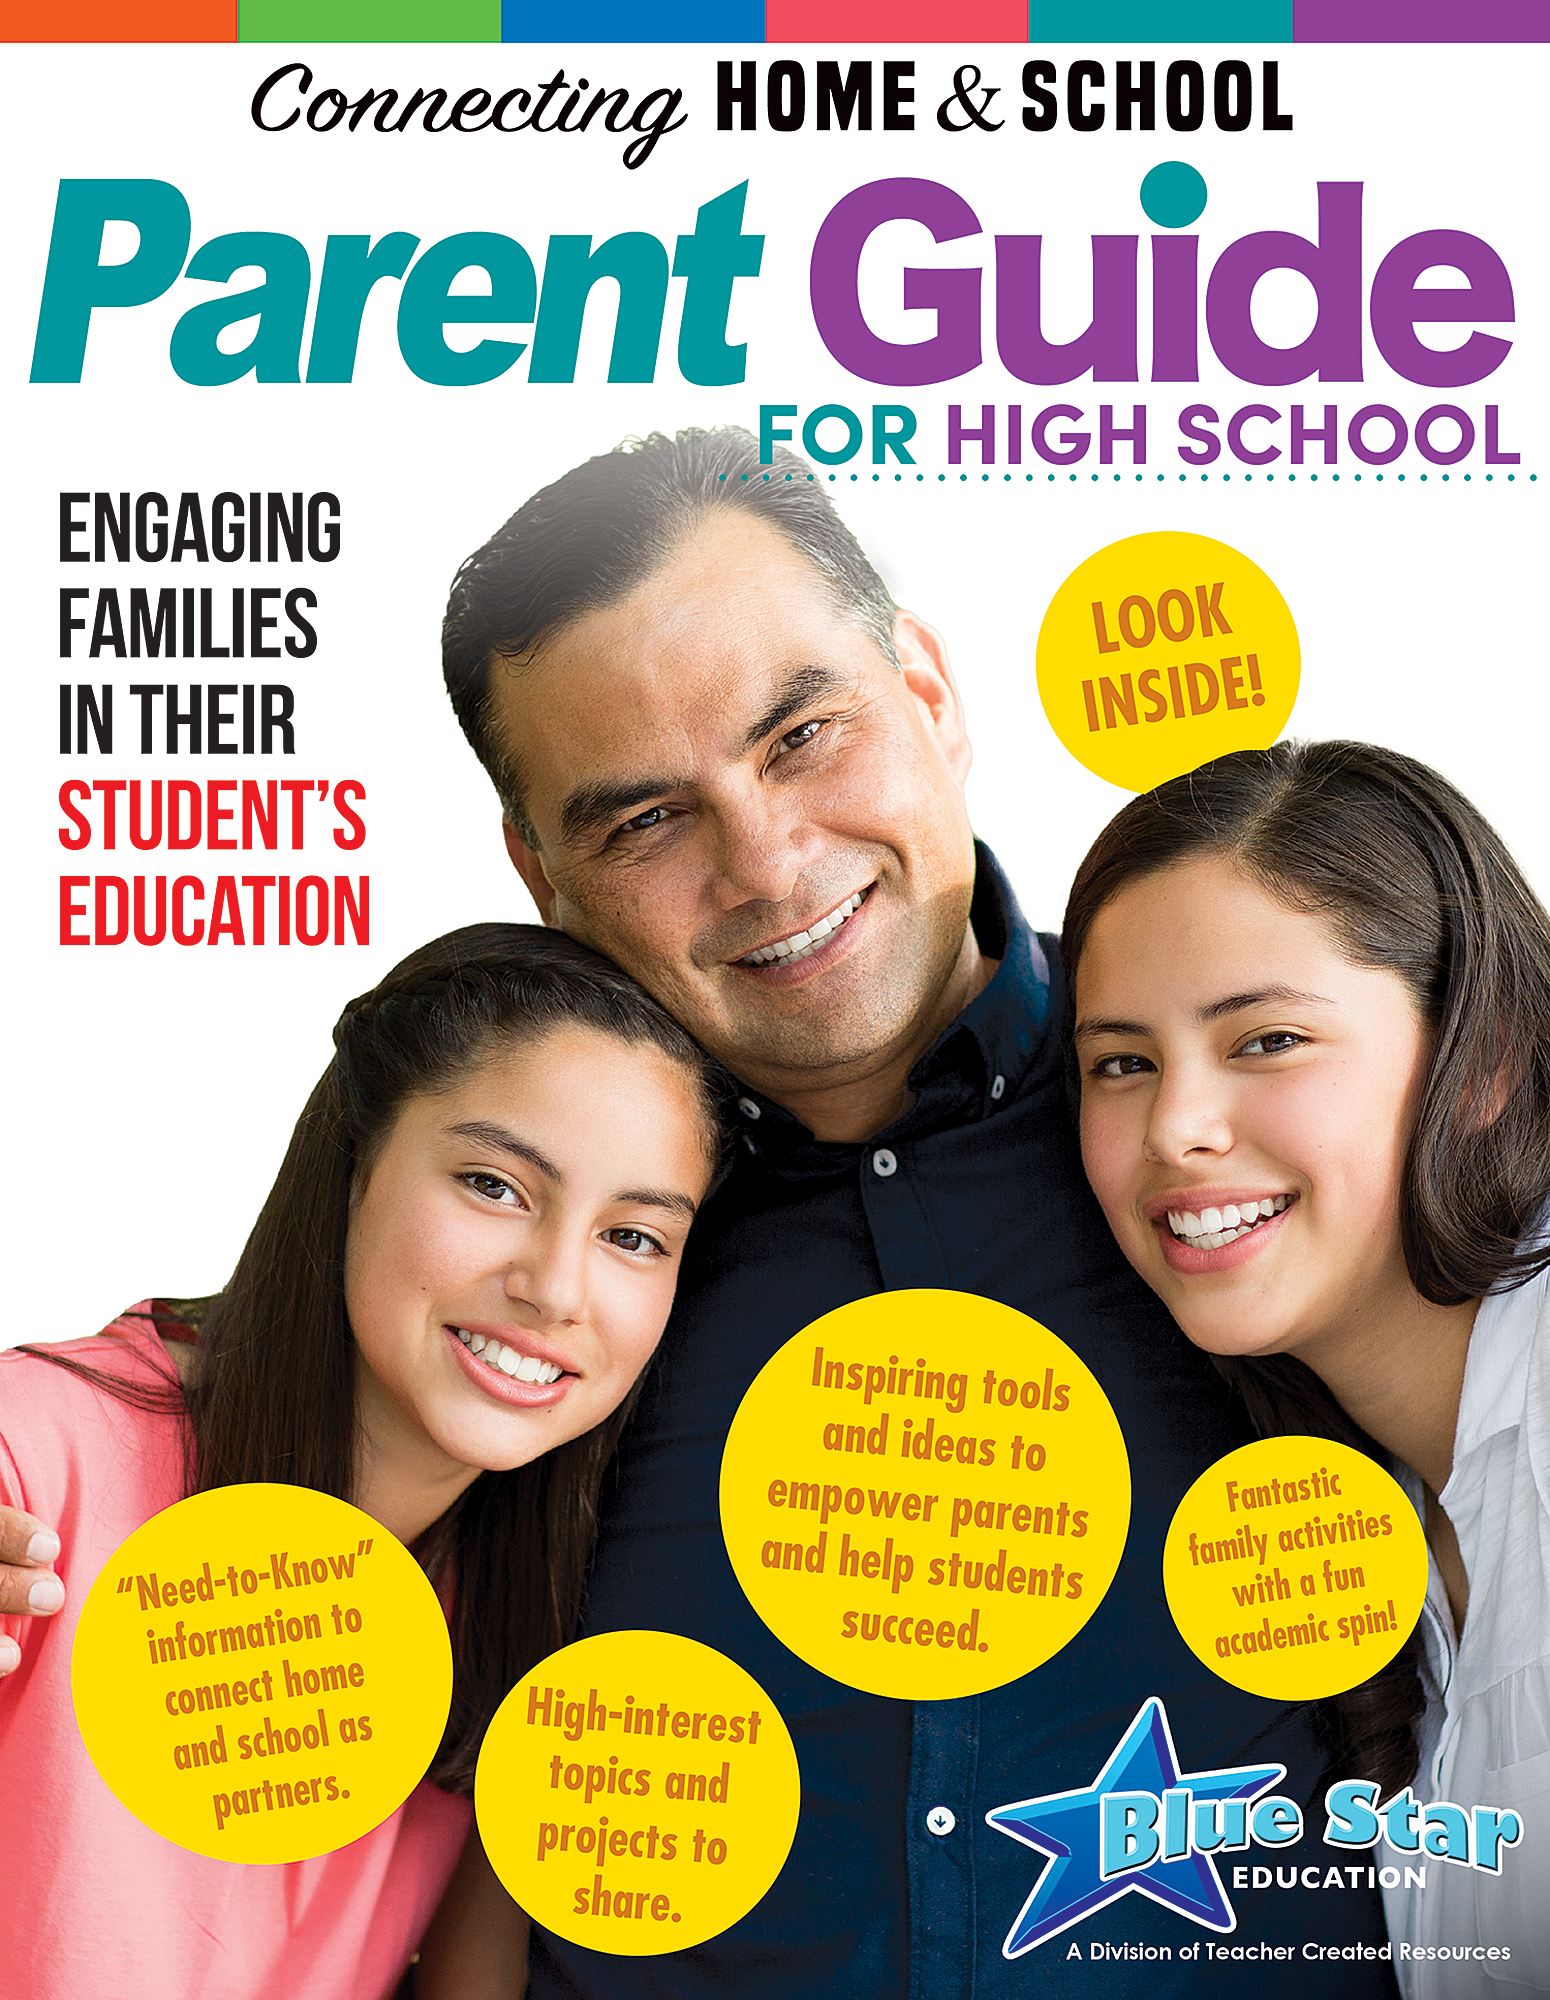 New Resource for High School Parents